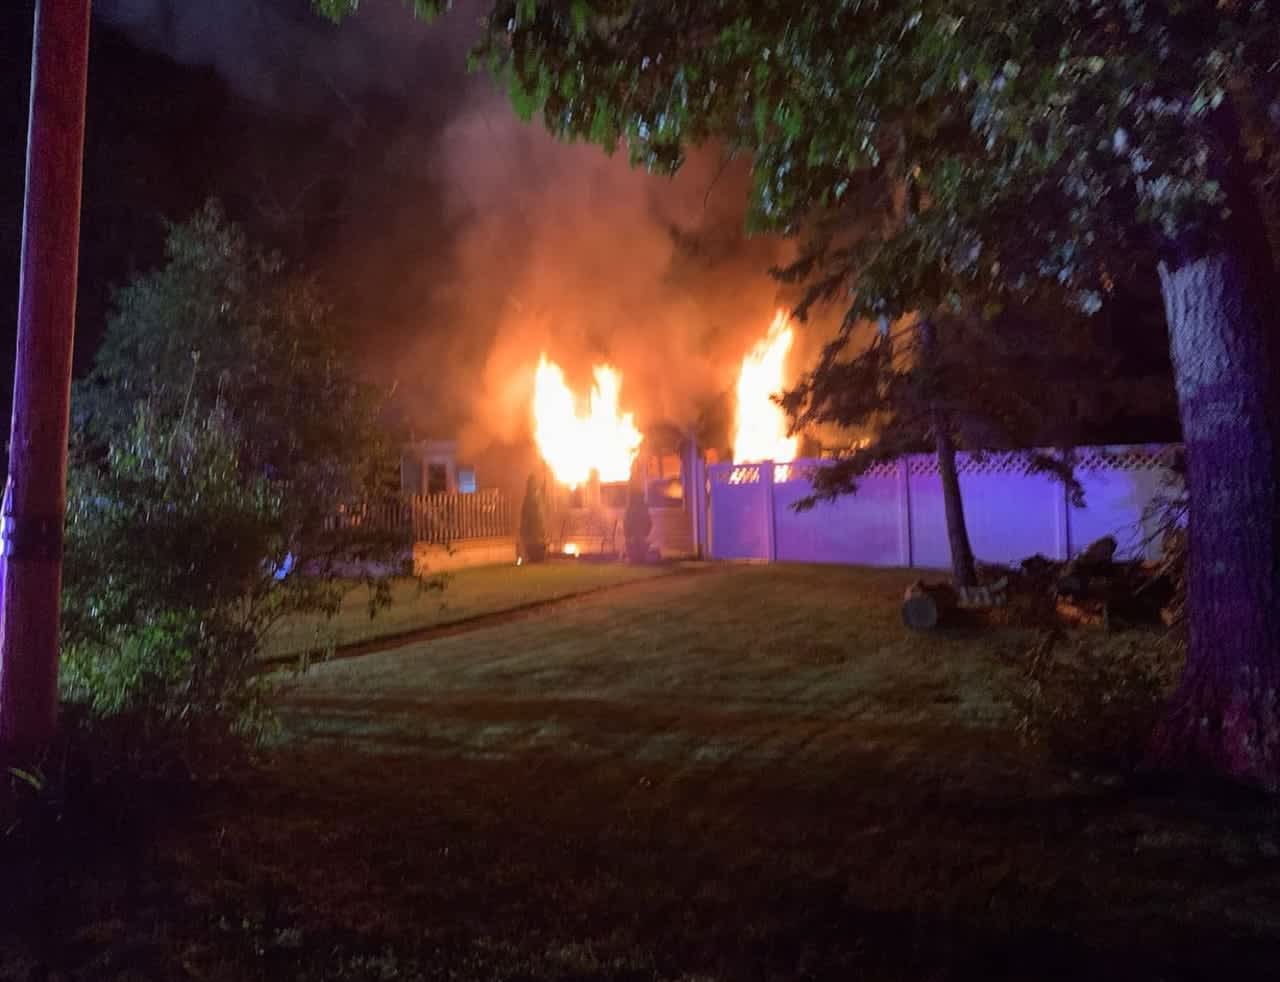 A 32-year-old man died when a fire broke out in Holtsville overnight.